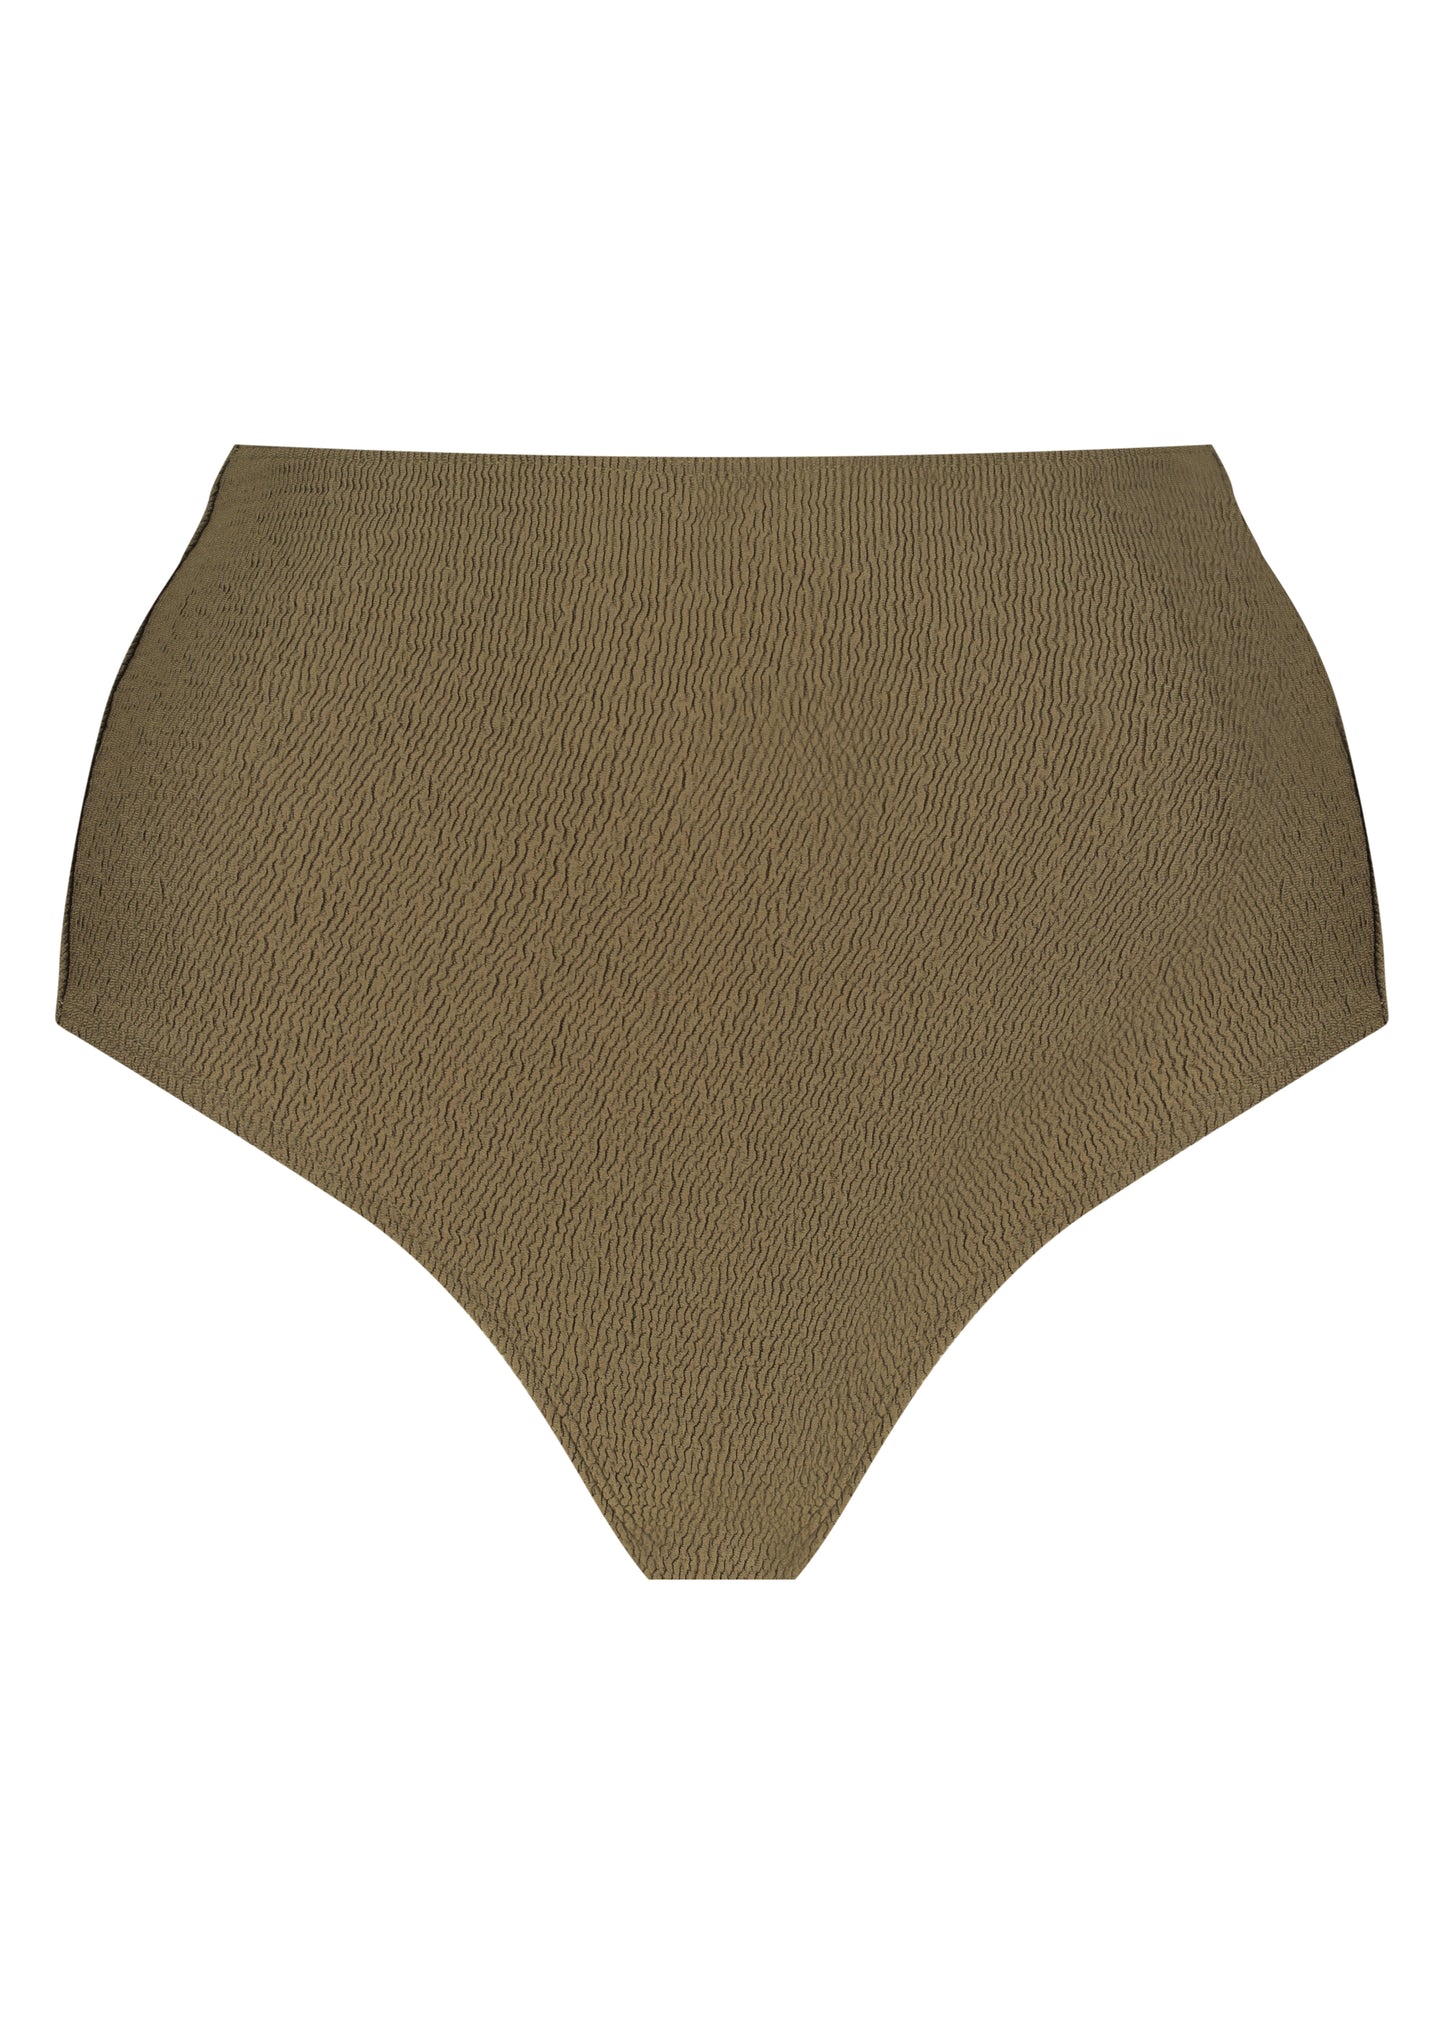 RUBY BOTTOM TEXTURE - FOREST